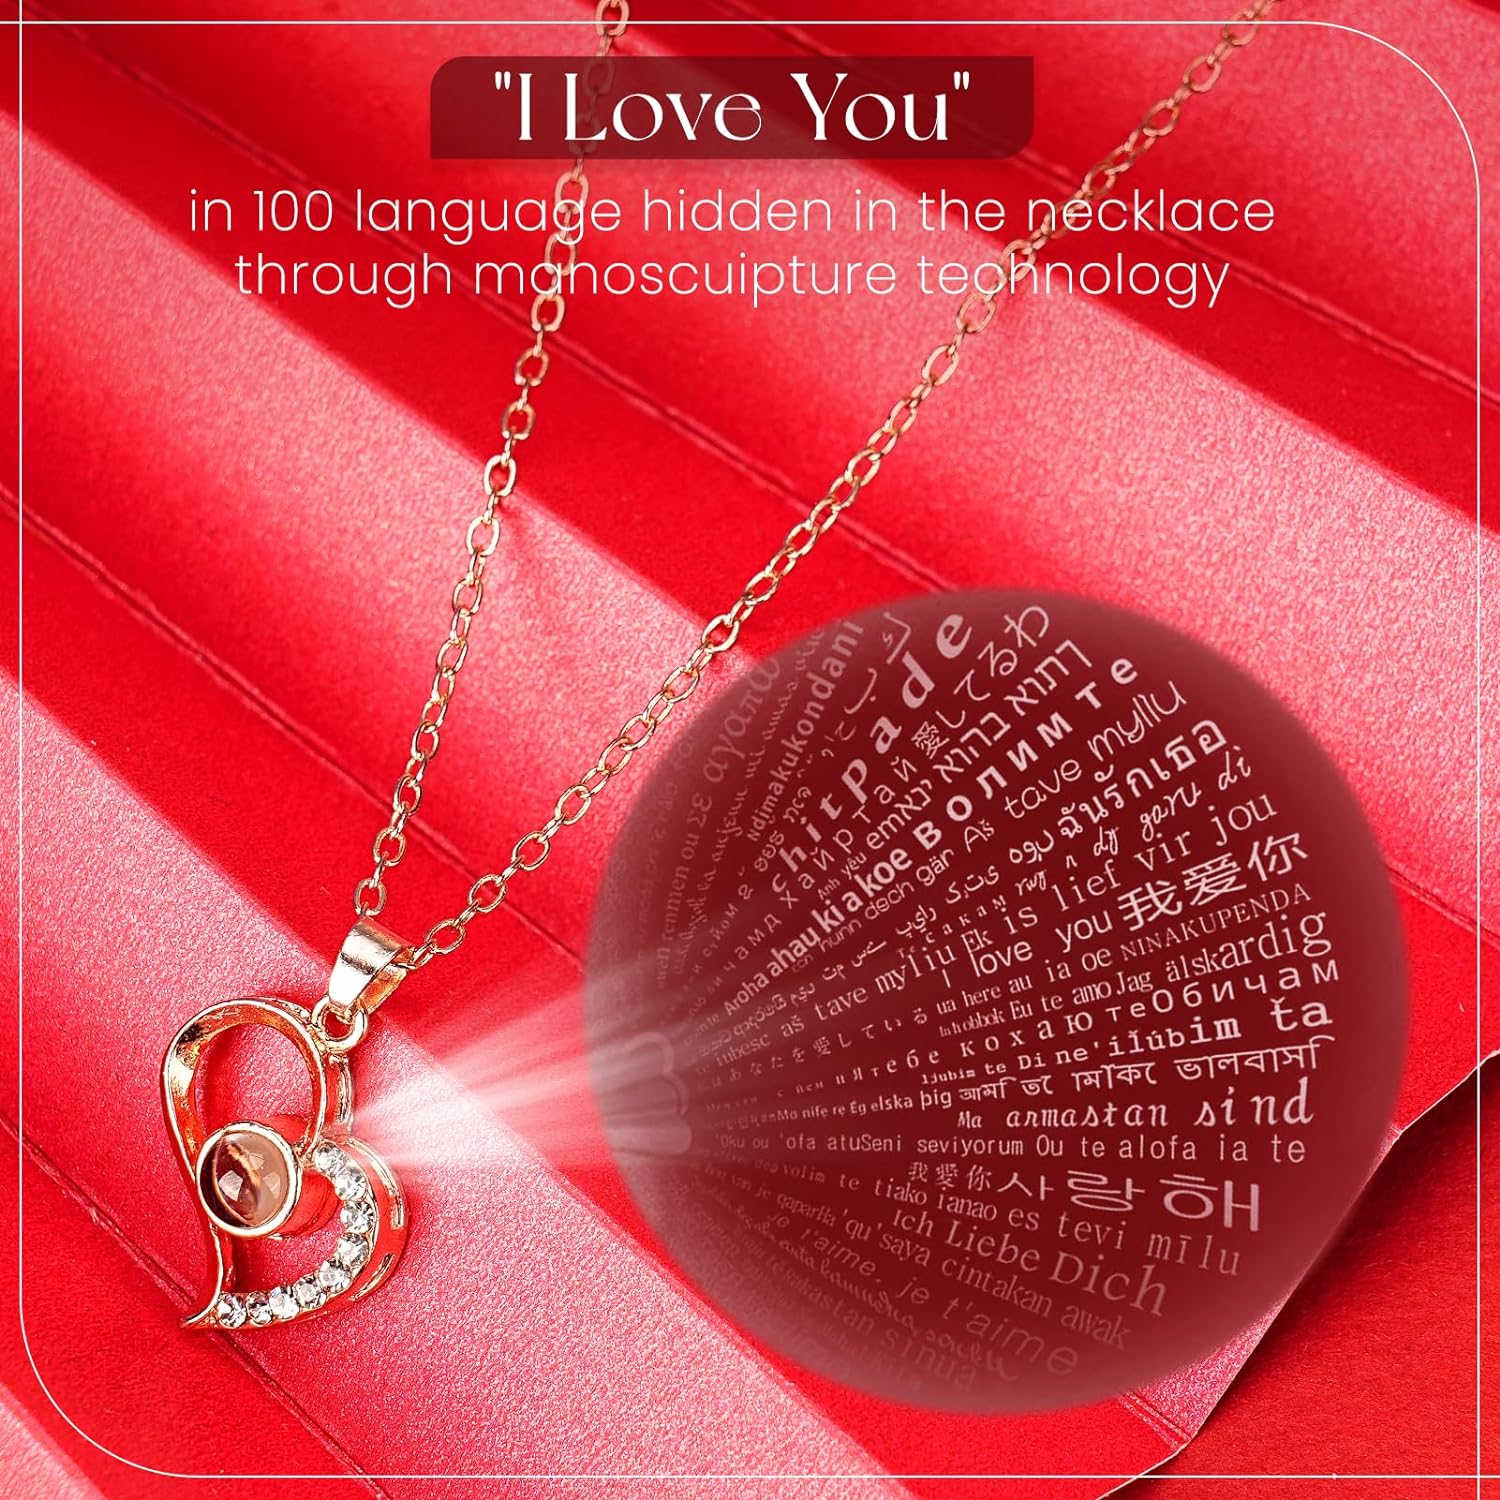 Rotate Rose Box Preserved with I Love You Necklace